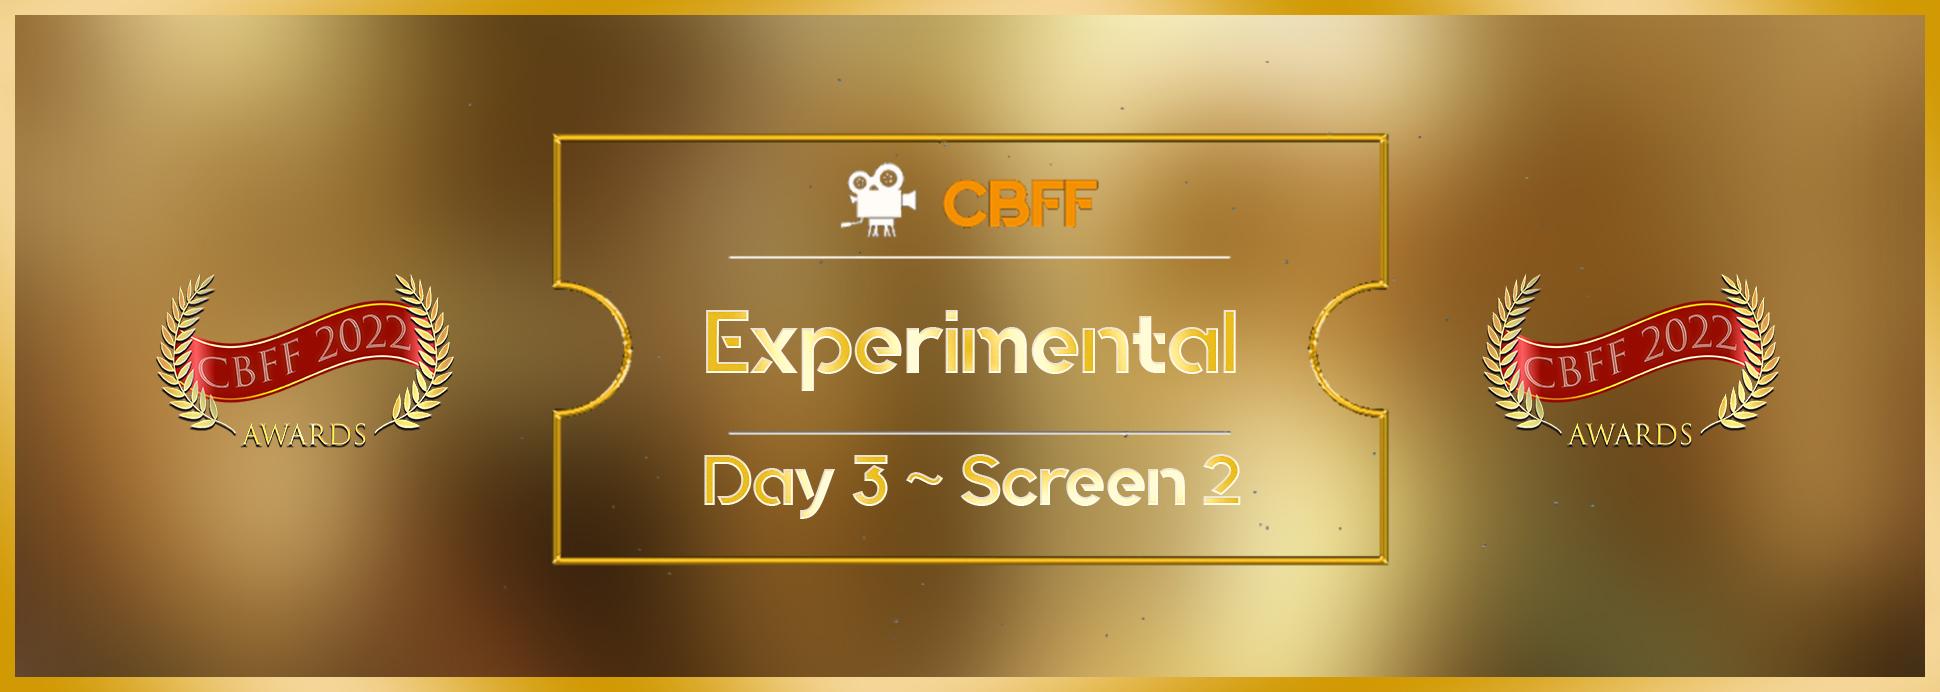 Day 3 Screen 2 Experimental 